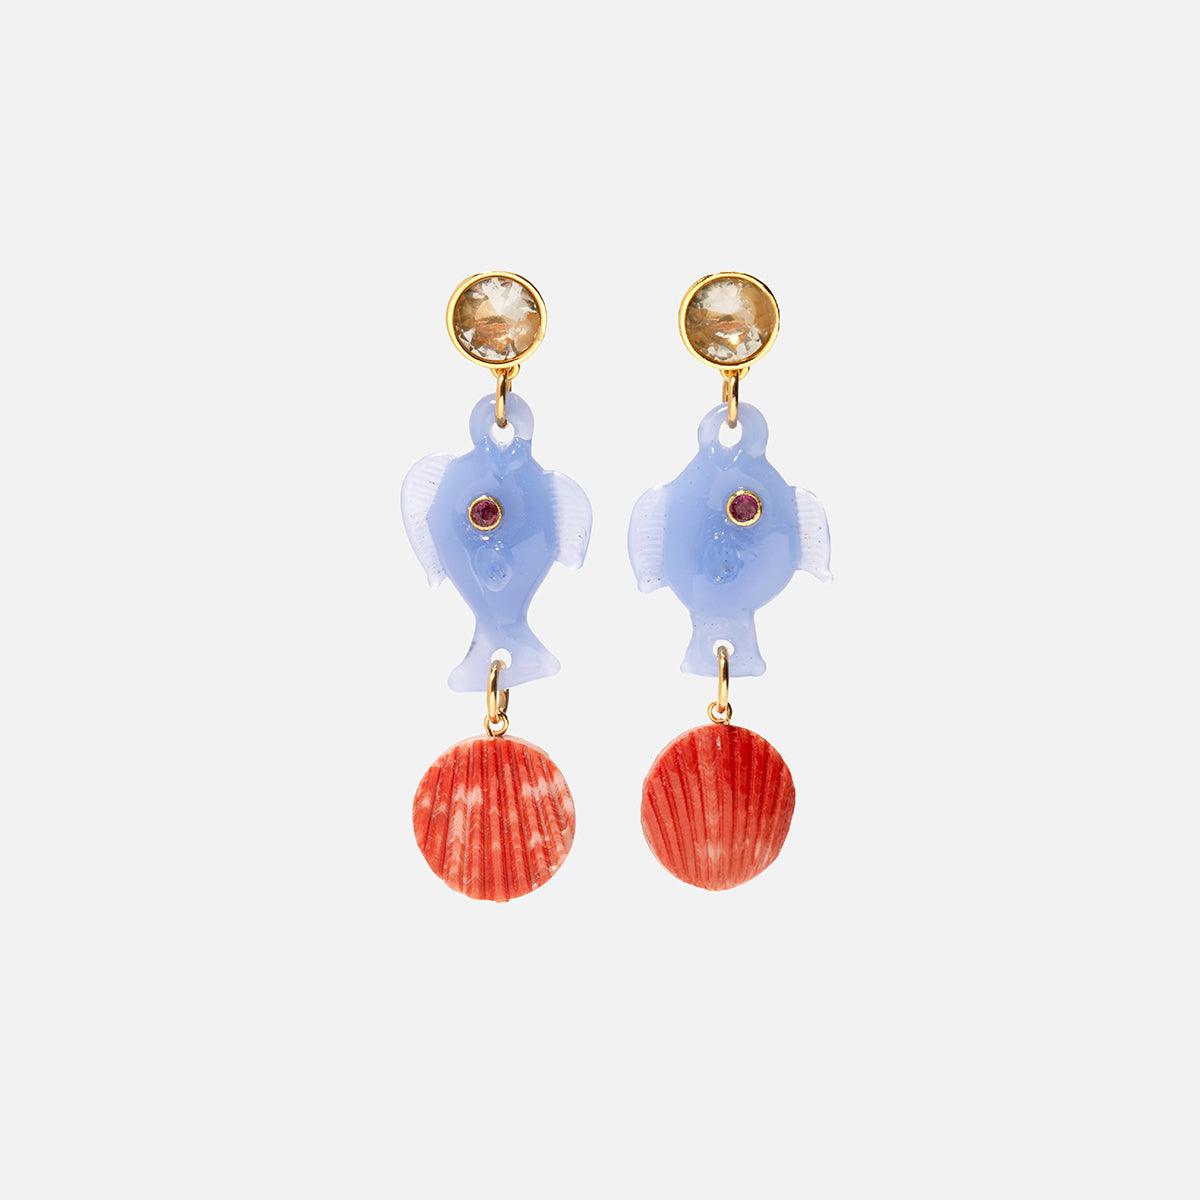 Lizzie Fortunato Pescado Earrings - At Present Jewelry